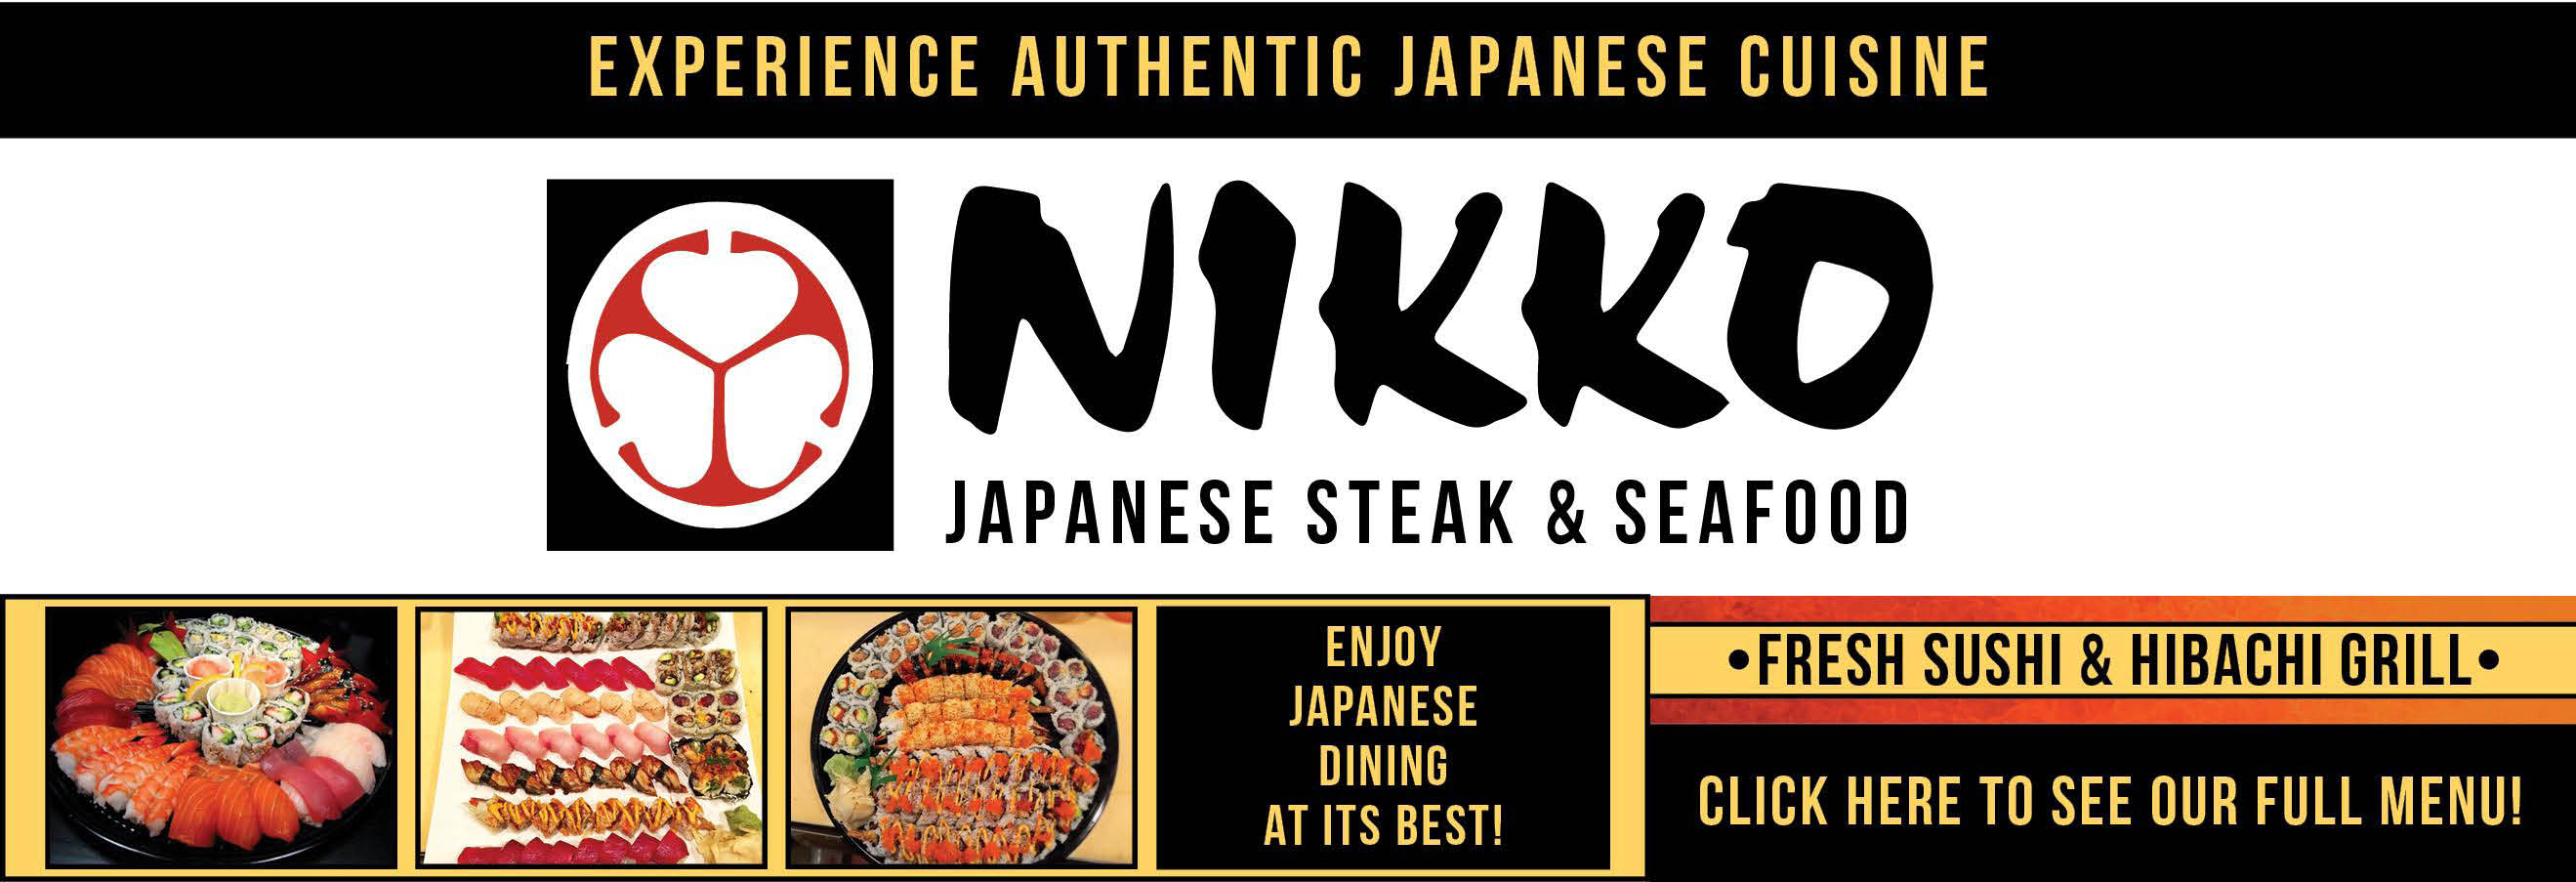 NIKKO JAPANESE STEAK & SEAFOOD in HAGERSTOWN, MD Local Coupons